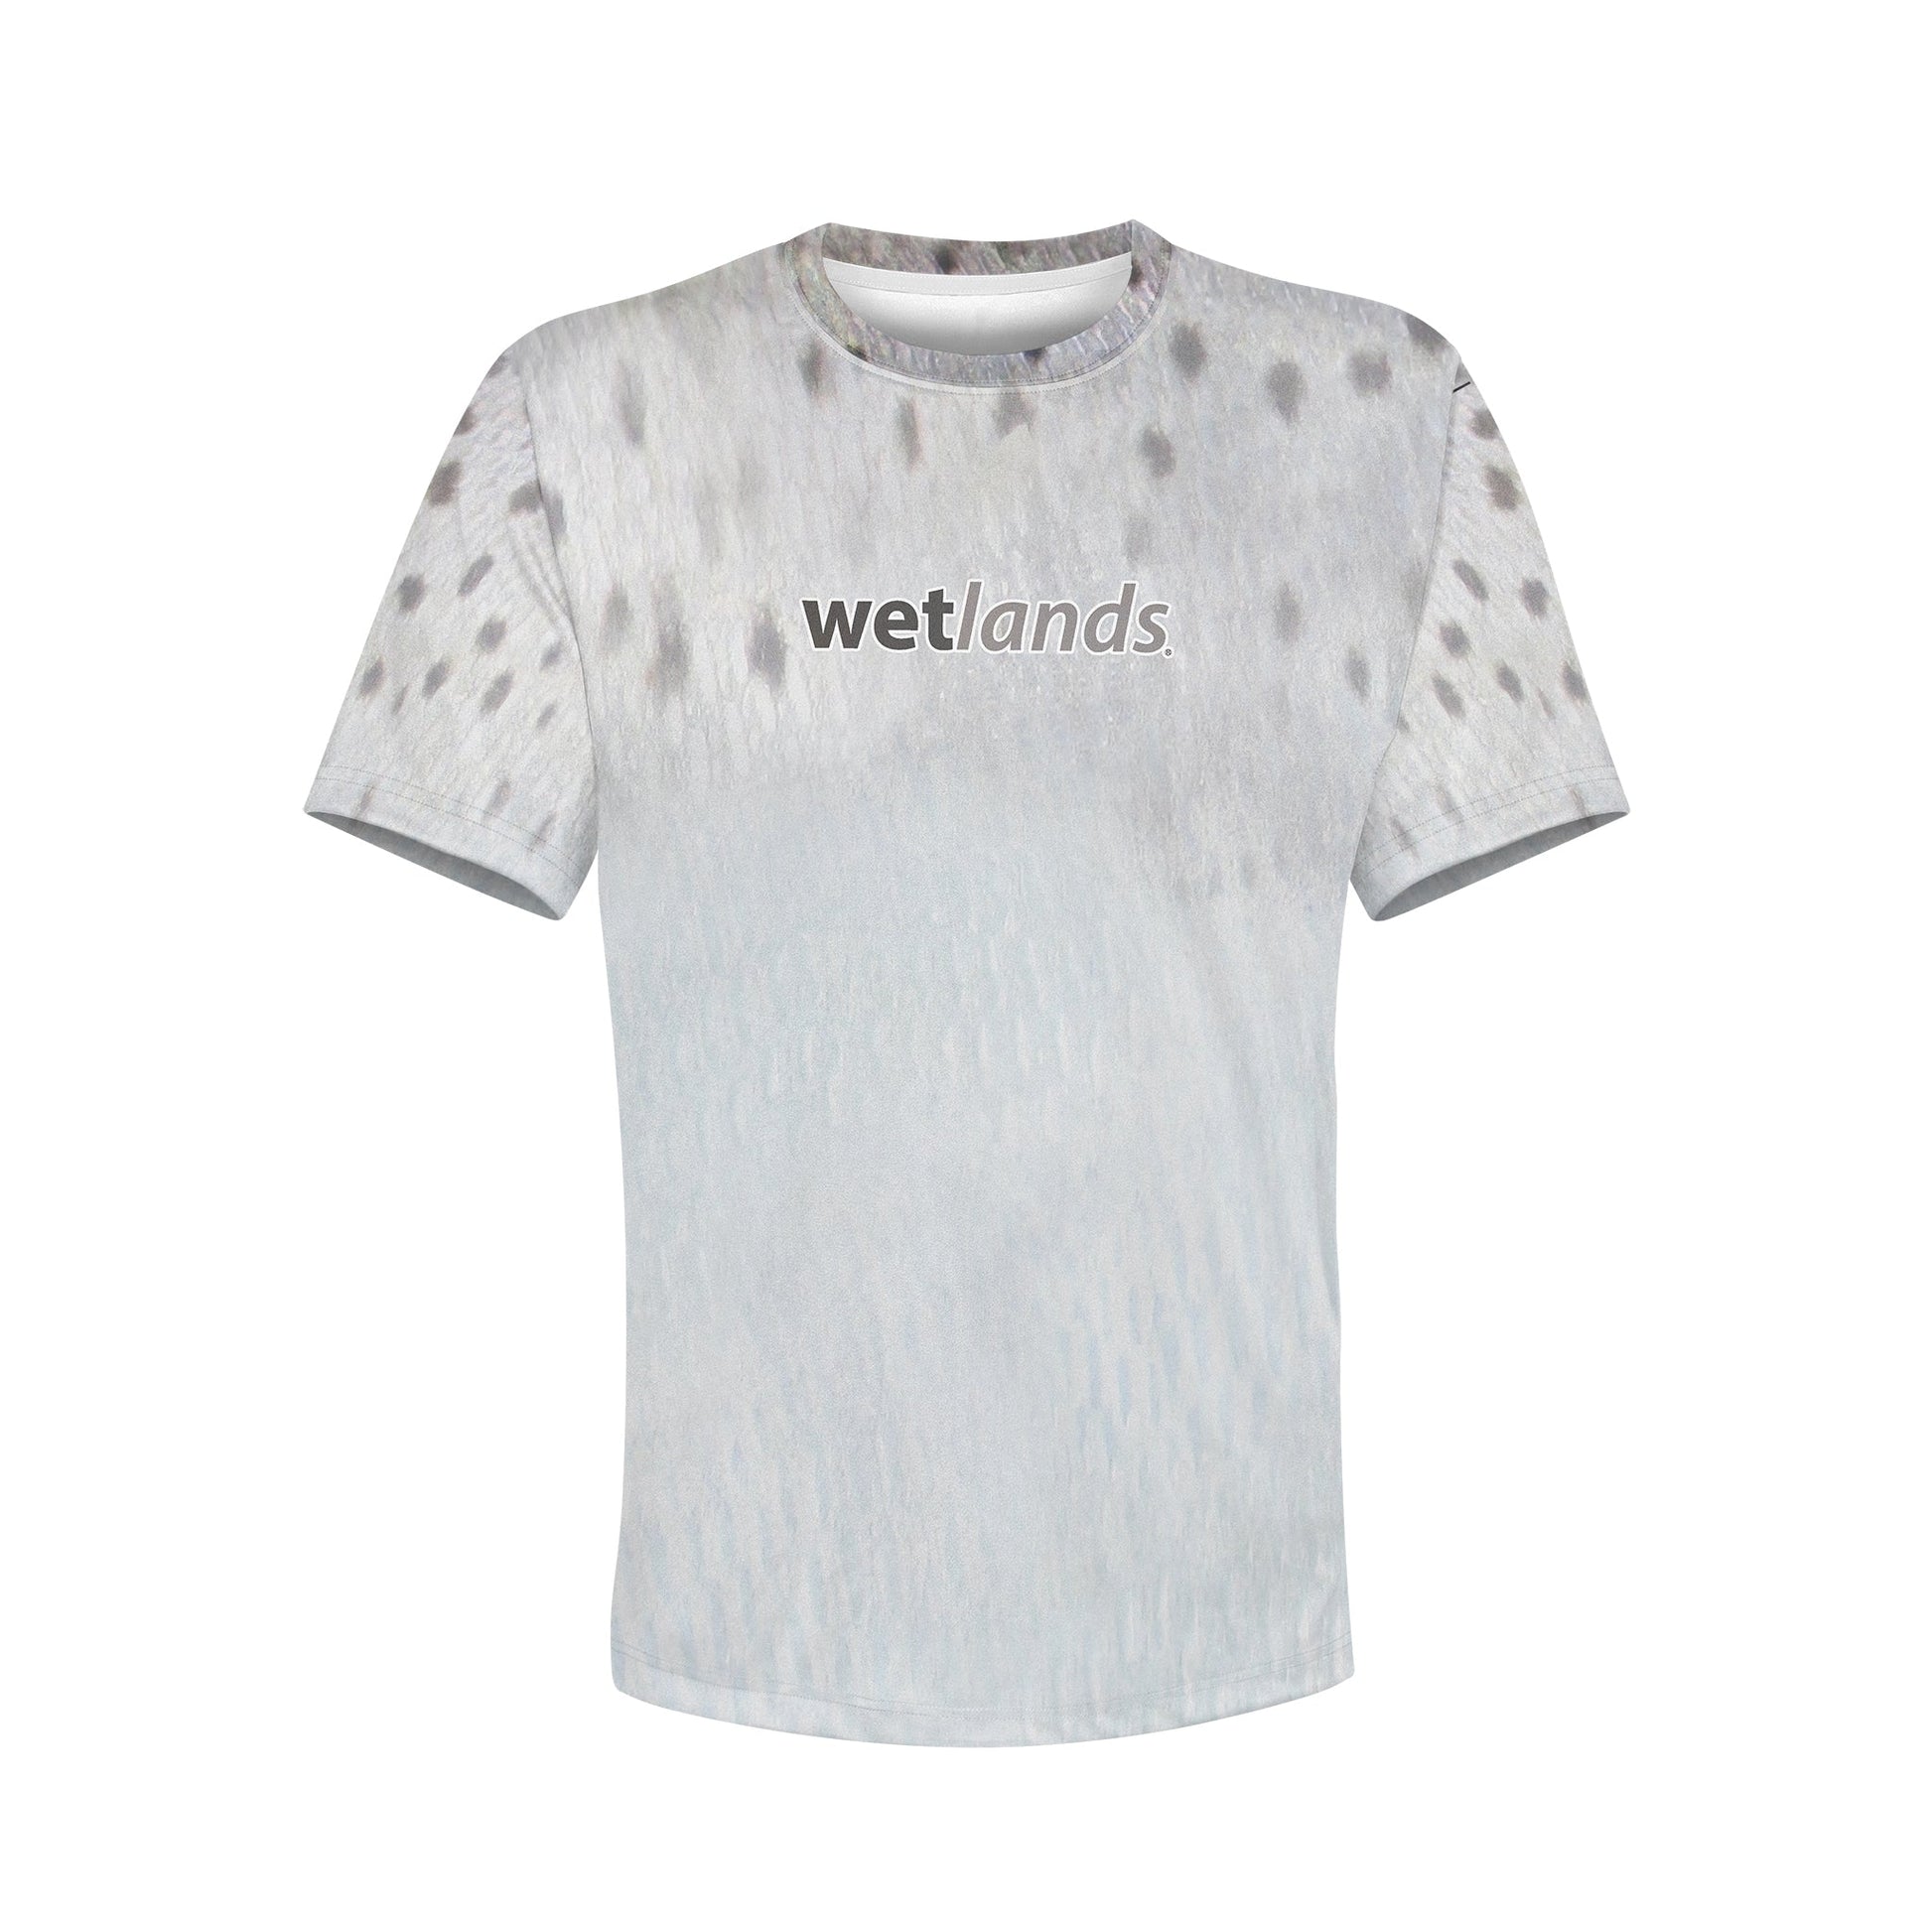 Speckled Trout Wetlands Performance Apparel